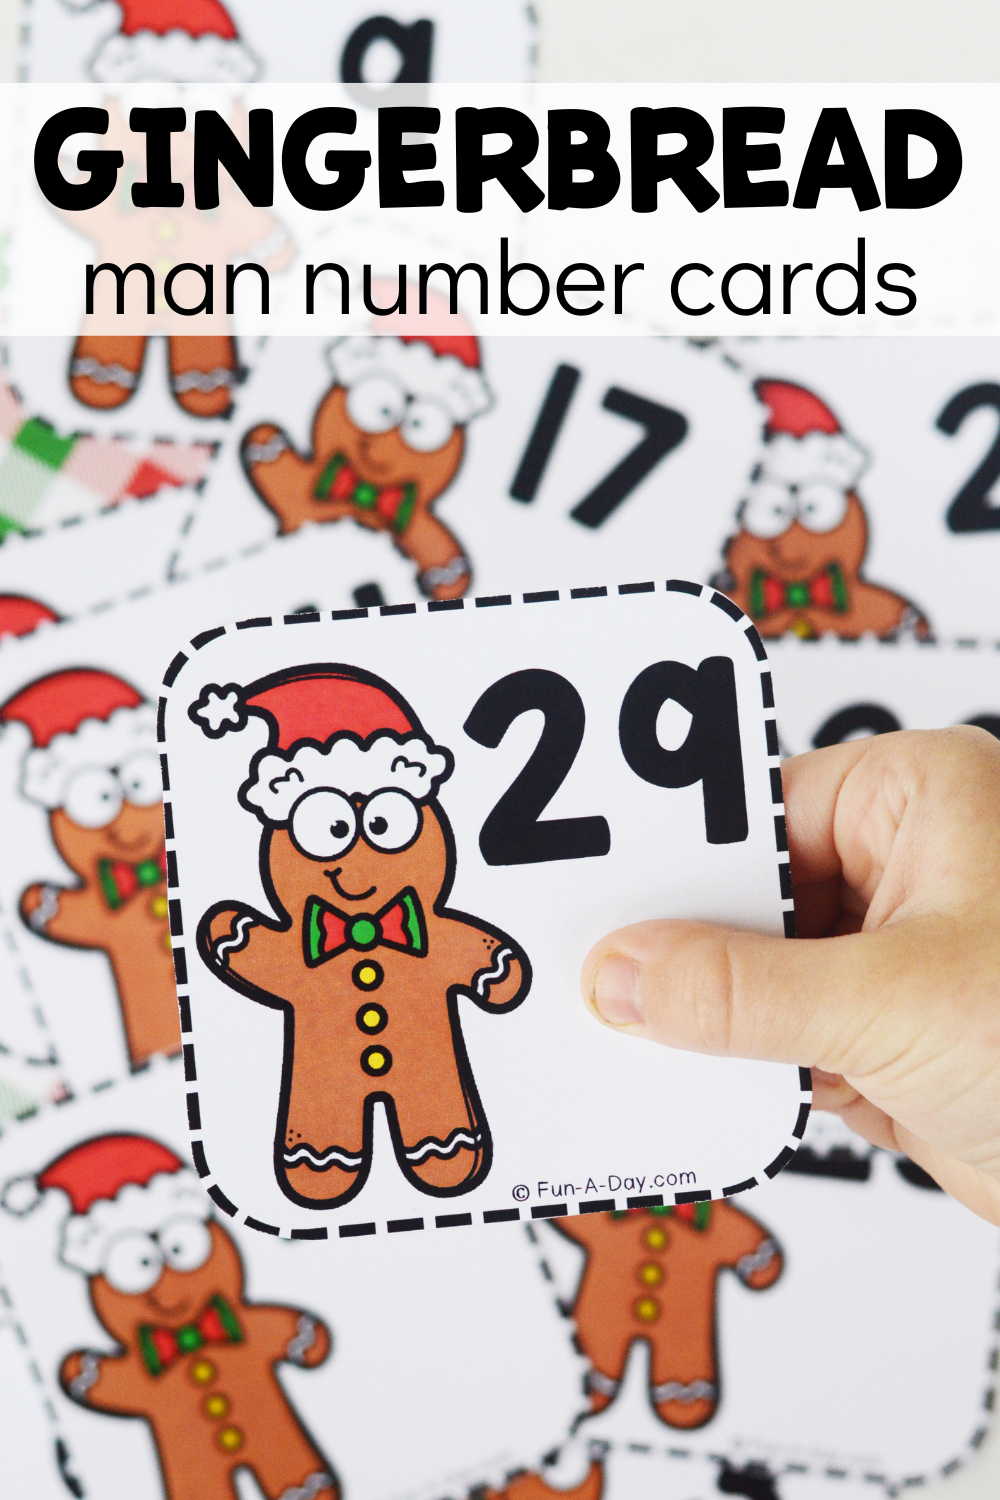 preschooler holding number card above a pile of more, with text that reads gingerbread man number cards